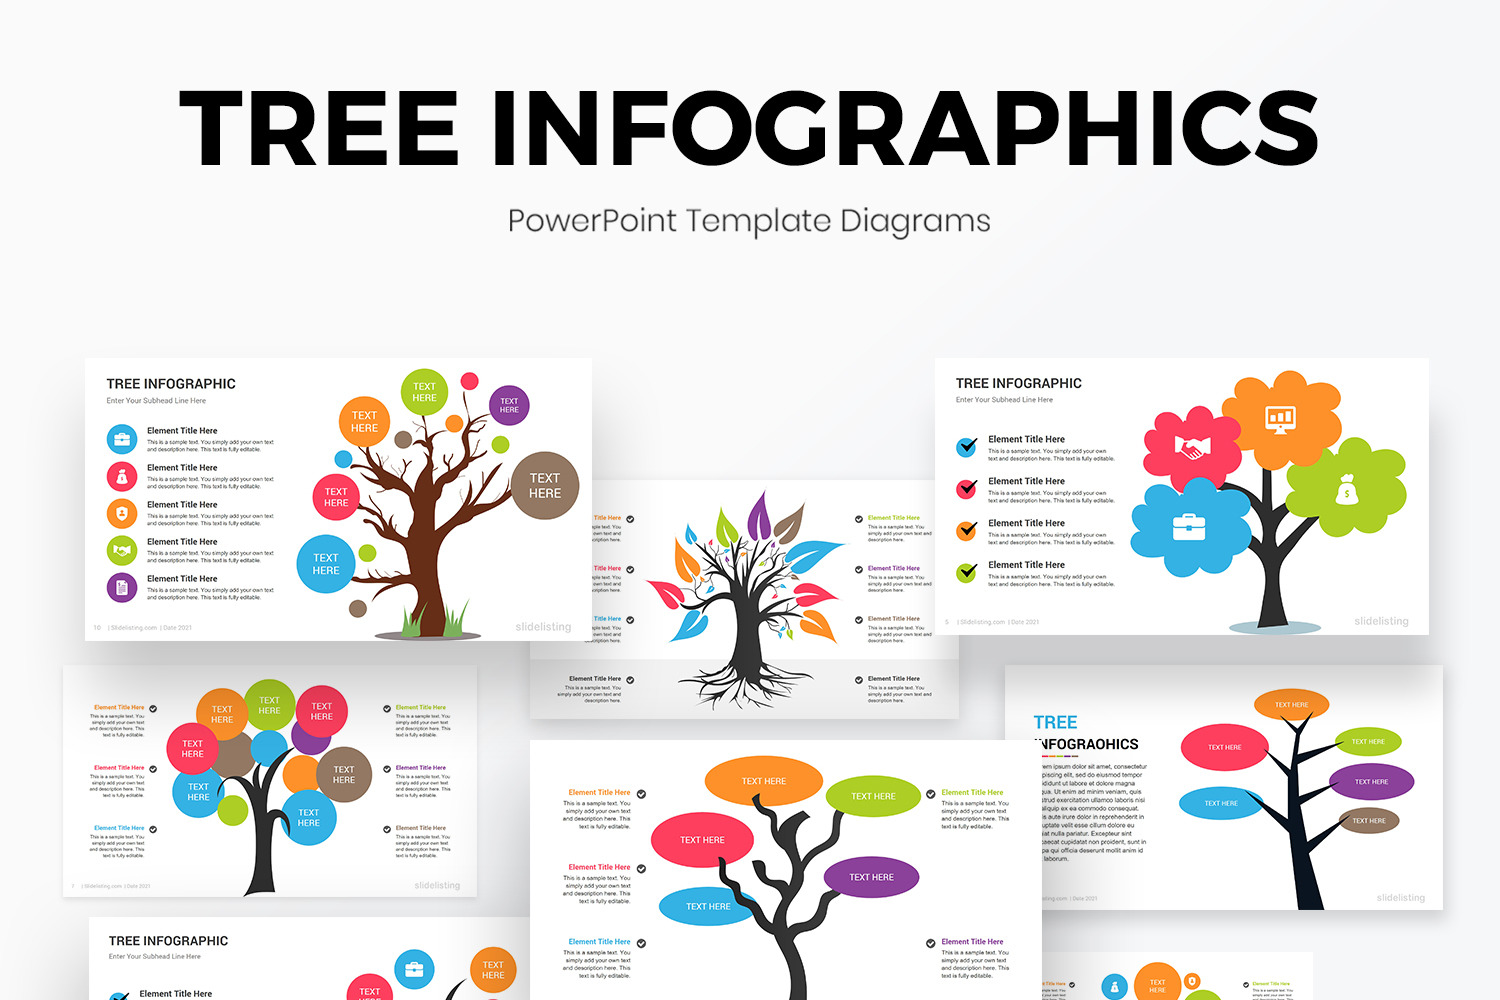 Tree Infographic PowerPoint Template - TemplateMonster